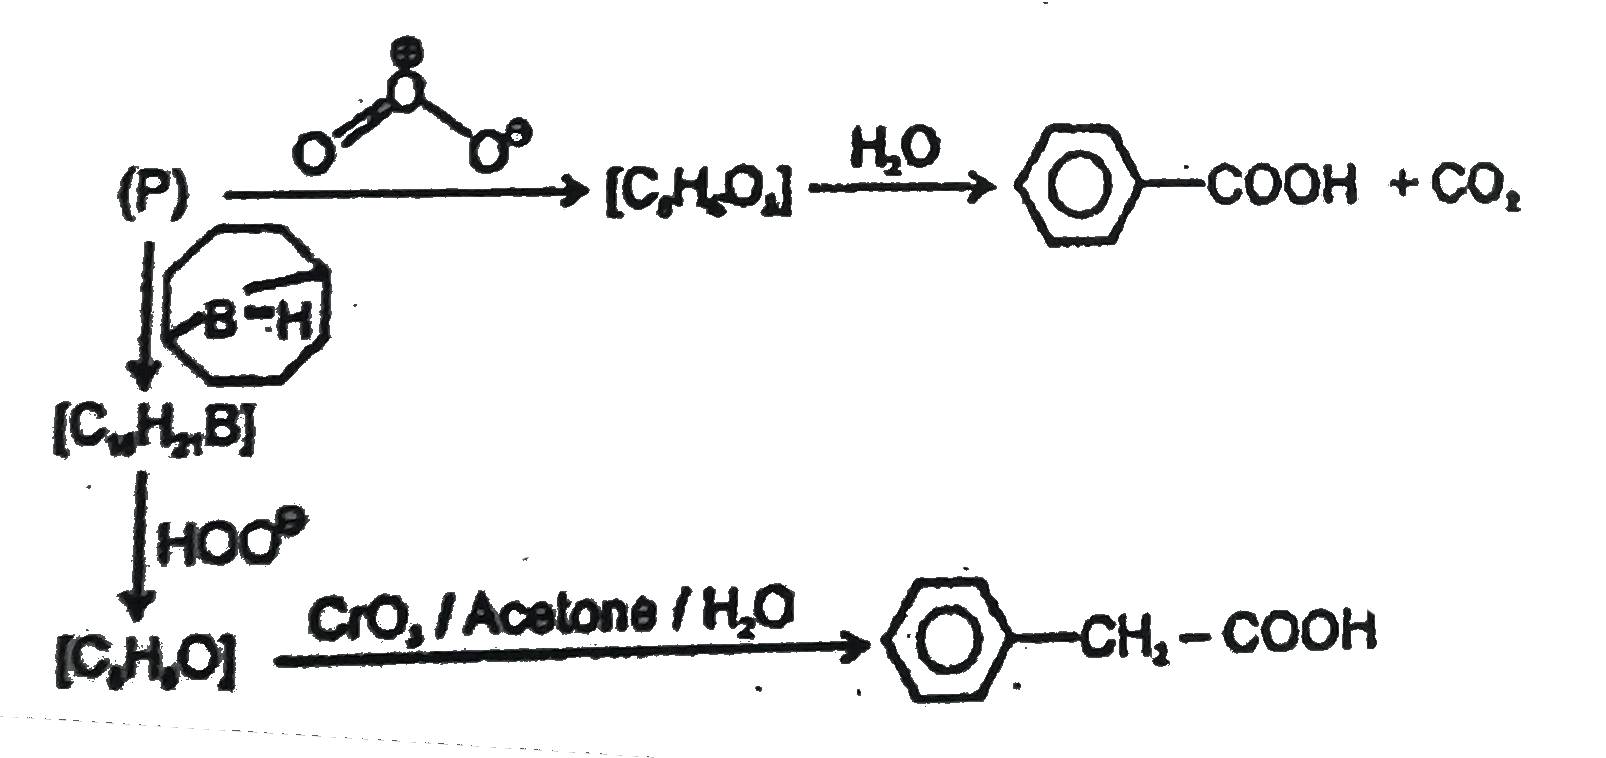 Compound 'P' of the following reaction sequence can be